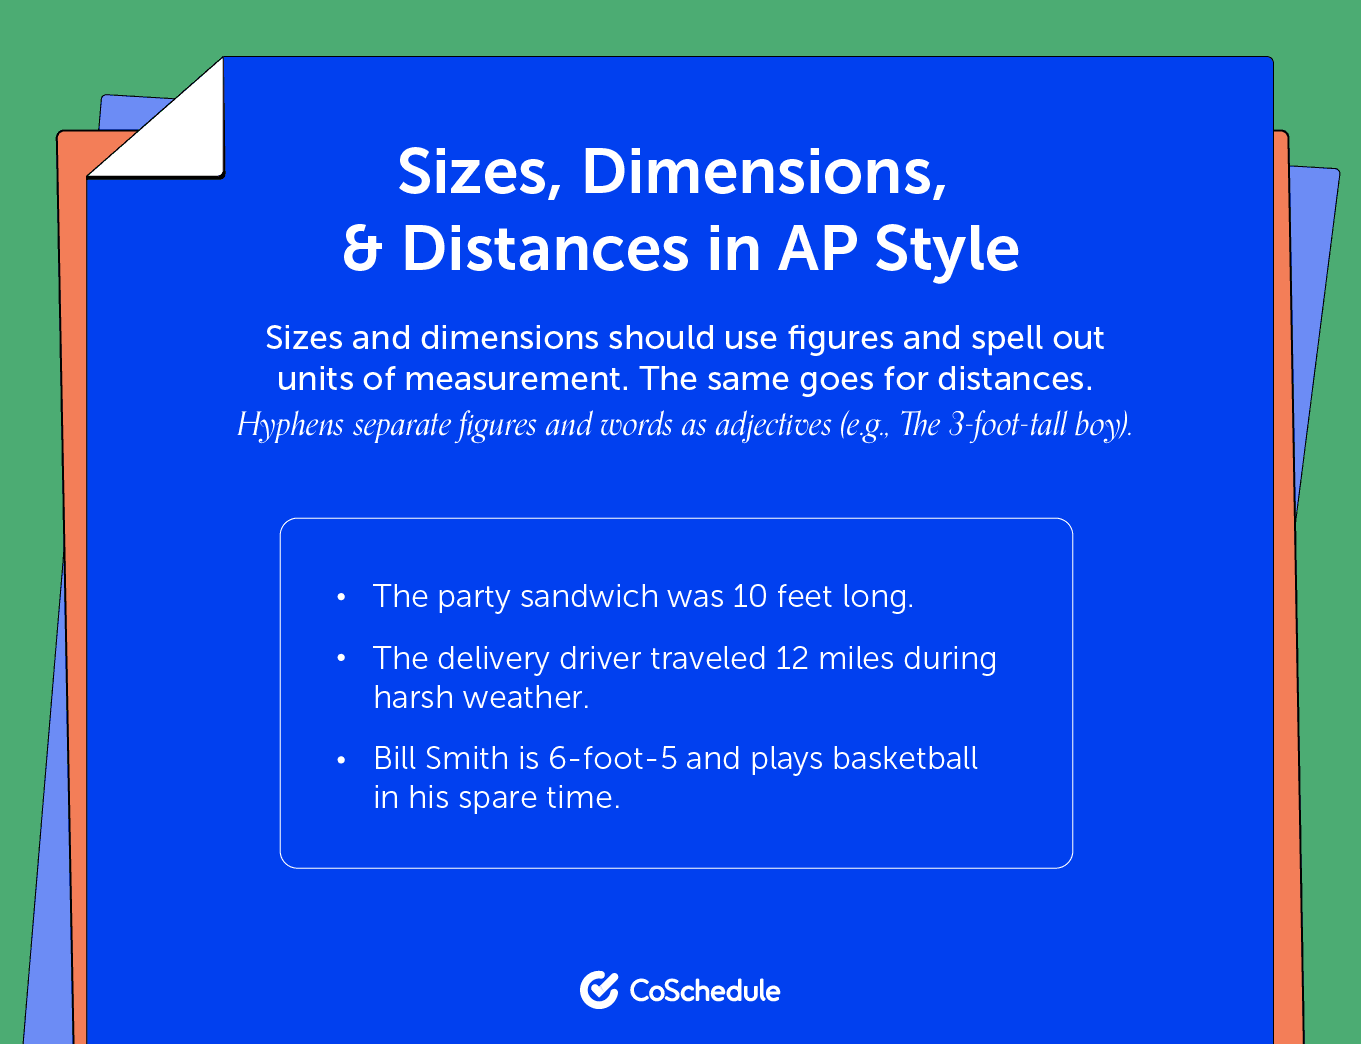 Sizes dimensions and distances in AP style